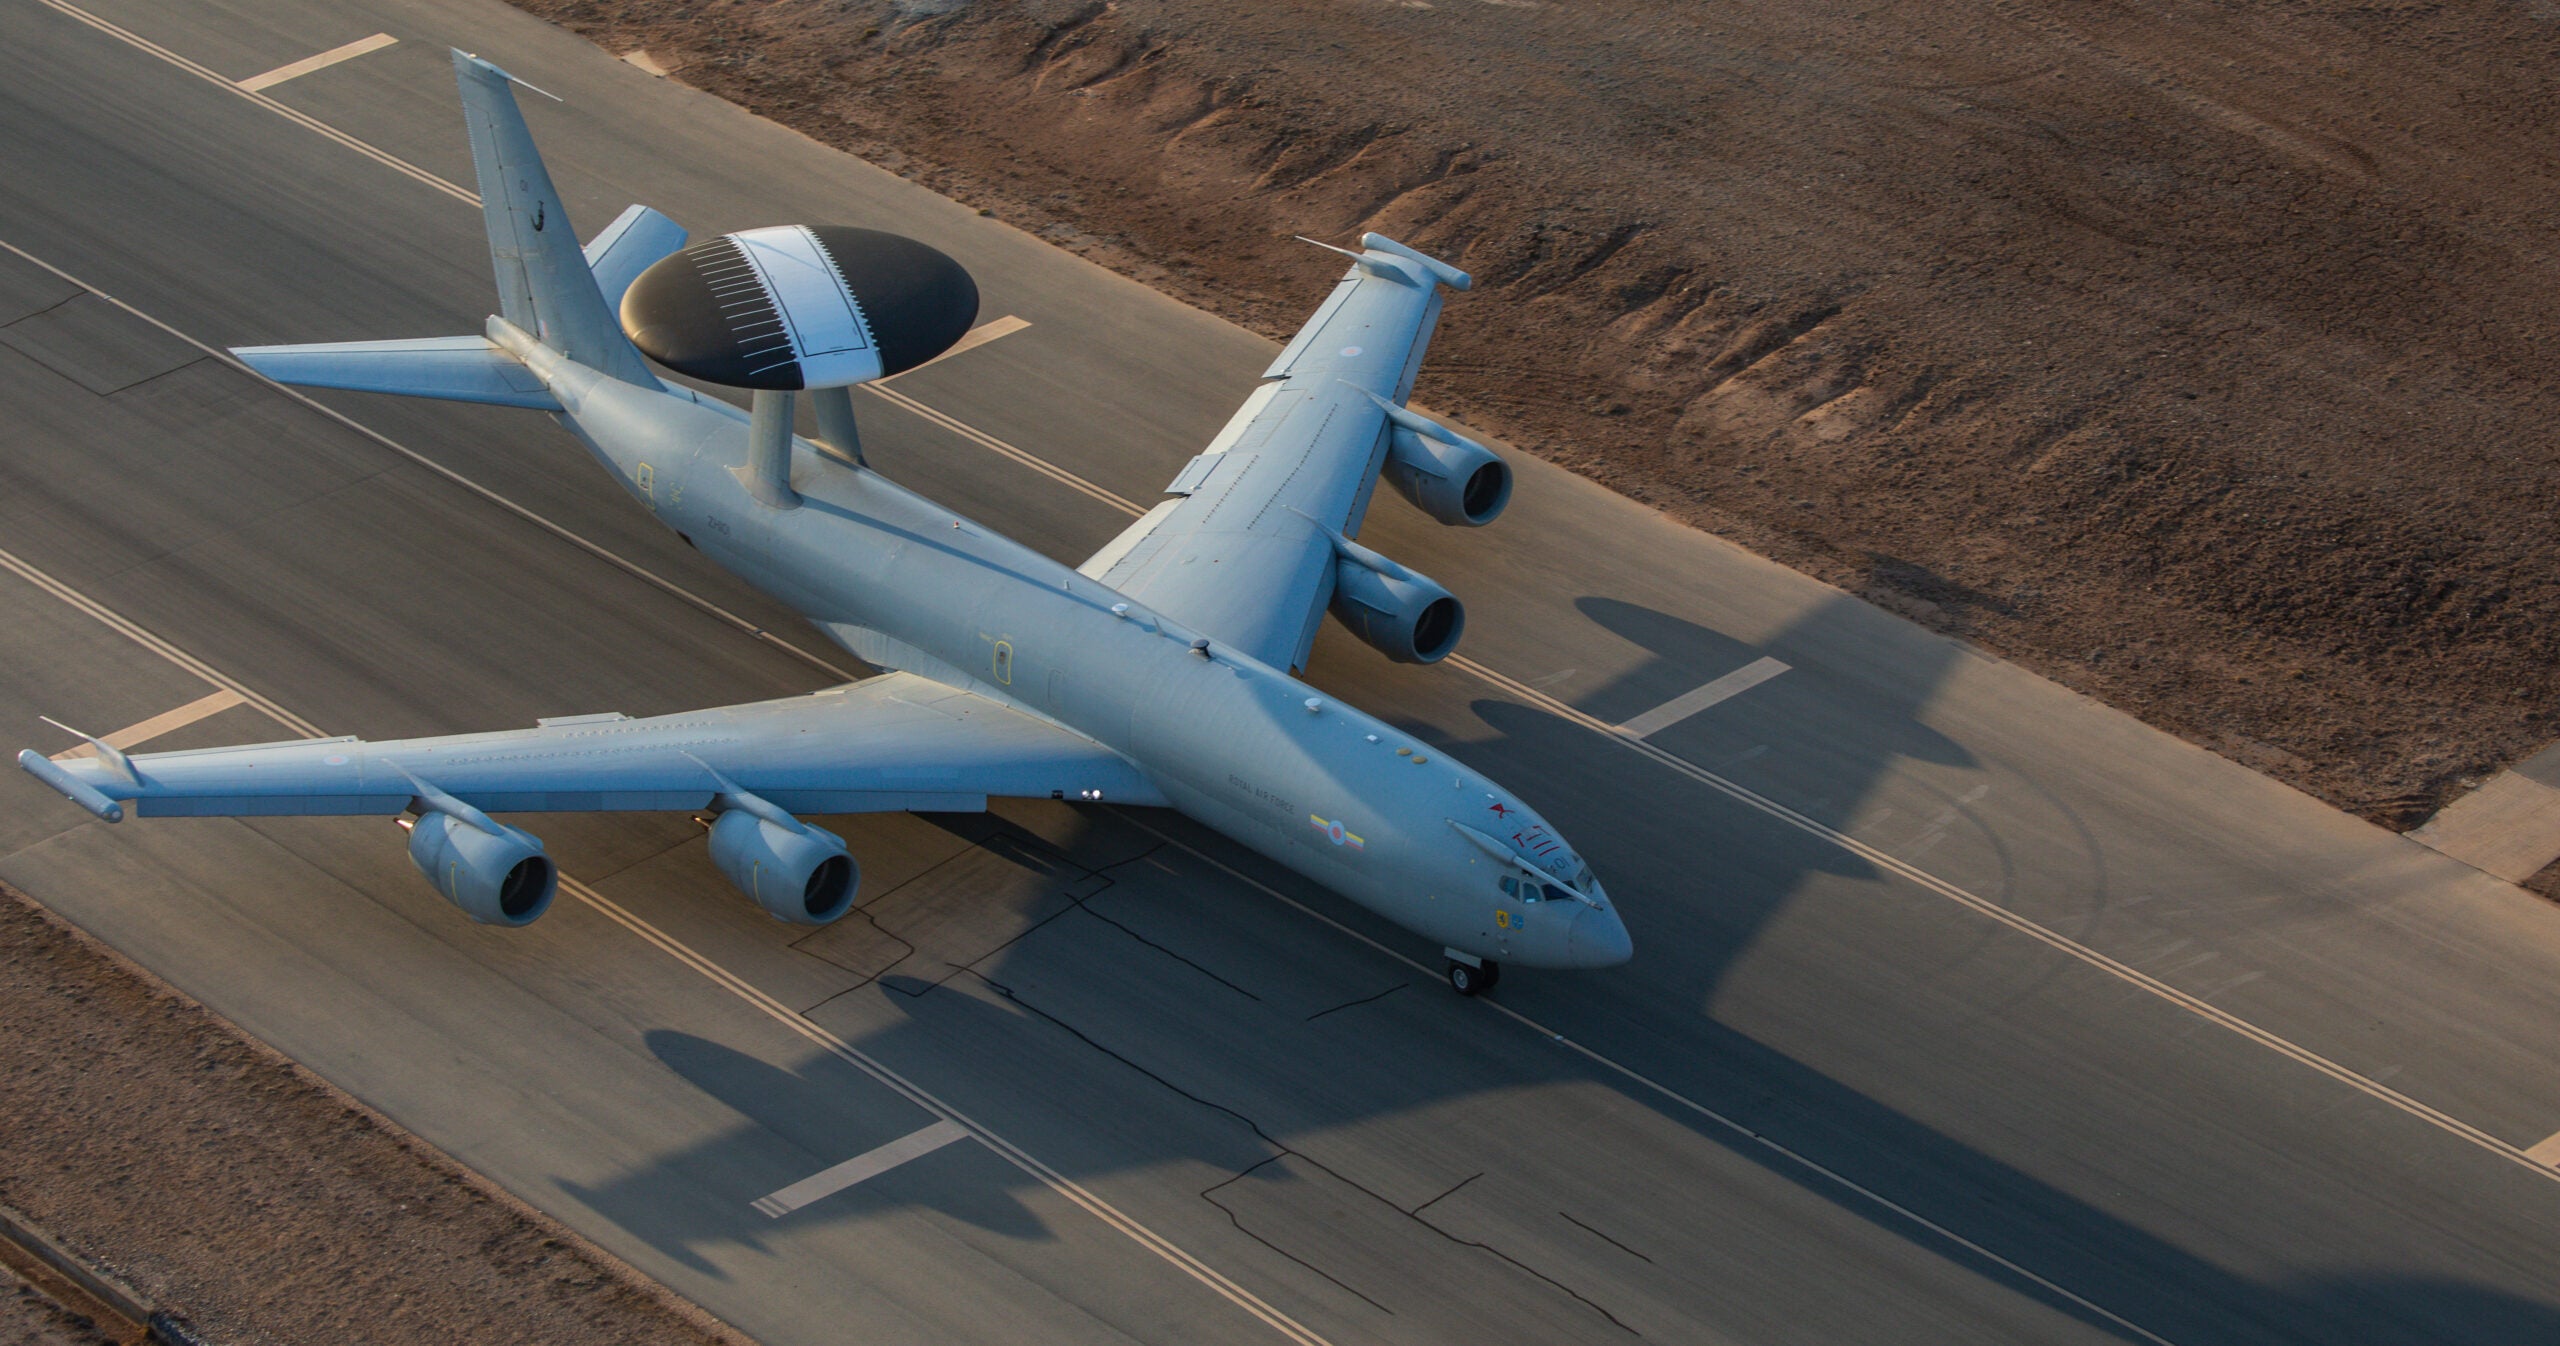 Pictured is a Boeing E-3D Sentry, aka AWACS, conducting a take-off and a fly-through at RAF Akrotiri.

This was before flying a mission in support of Operation Shader captured from a helicopter flown by 84 Squadron.

The E-3D was at RAF Akrotiri flying its final missions supporting Operations before returning to its home unit, RAF Waddington.

The E-3D Sentry entered RAF service in March 1991 as part of the RAFs Intelligence, Surveillance, Targeting and Reconnaissance fleet.  

Since then the Sentry aircraft have been involved in UK operations including Iraq, Afghanistan, Libya, the broader Middle East and the Caribbean, together with a NATO role.  

The Sentry is also known as the Airborne Warning and Control System or AWACS.

The E-3D Sentry was retired in 2021 and will be replaced in 2023 by a fleet of three Boeing E-7 Wedgetails that will operate from RAF Lossiemouth in Scotland.  

During the period between retirement and the Wedgetail becoming operational, the Intelligence, Surveillance, Targeting and Reconnaissance requirements will be covered by a combination of other aircraft and E-3s from our NATO partners.